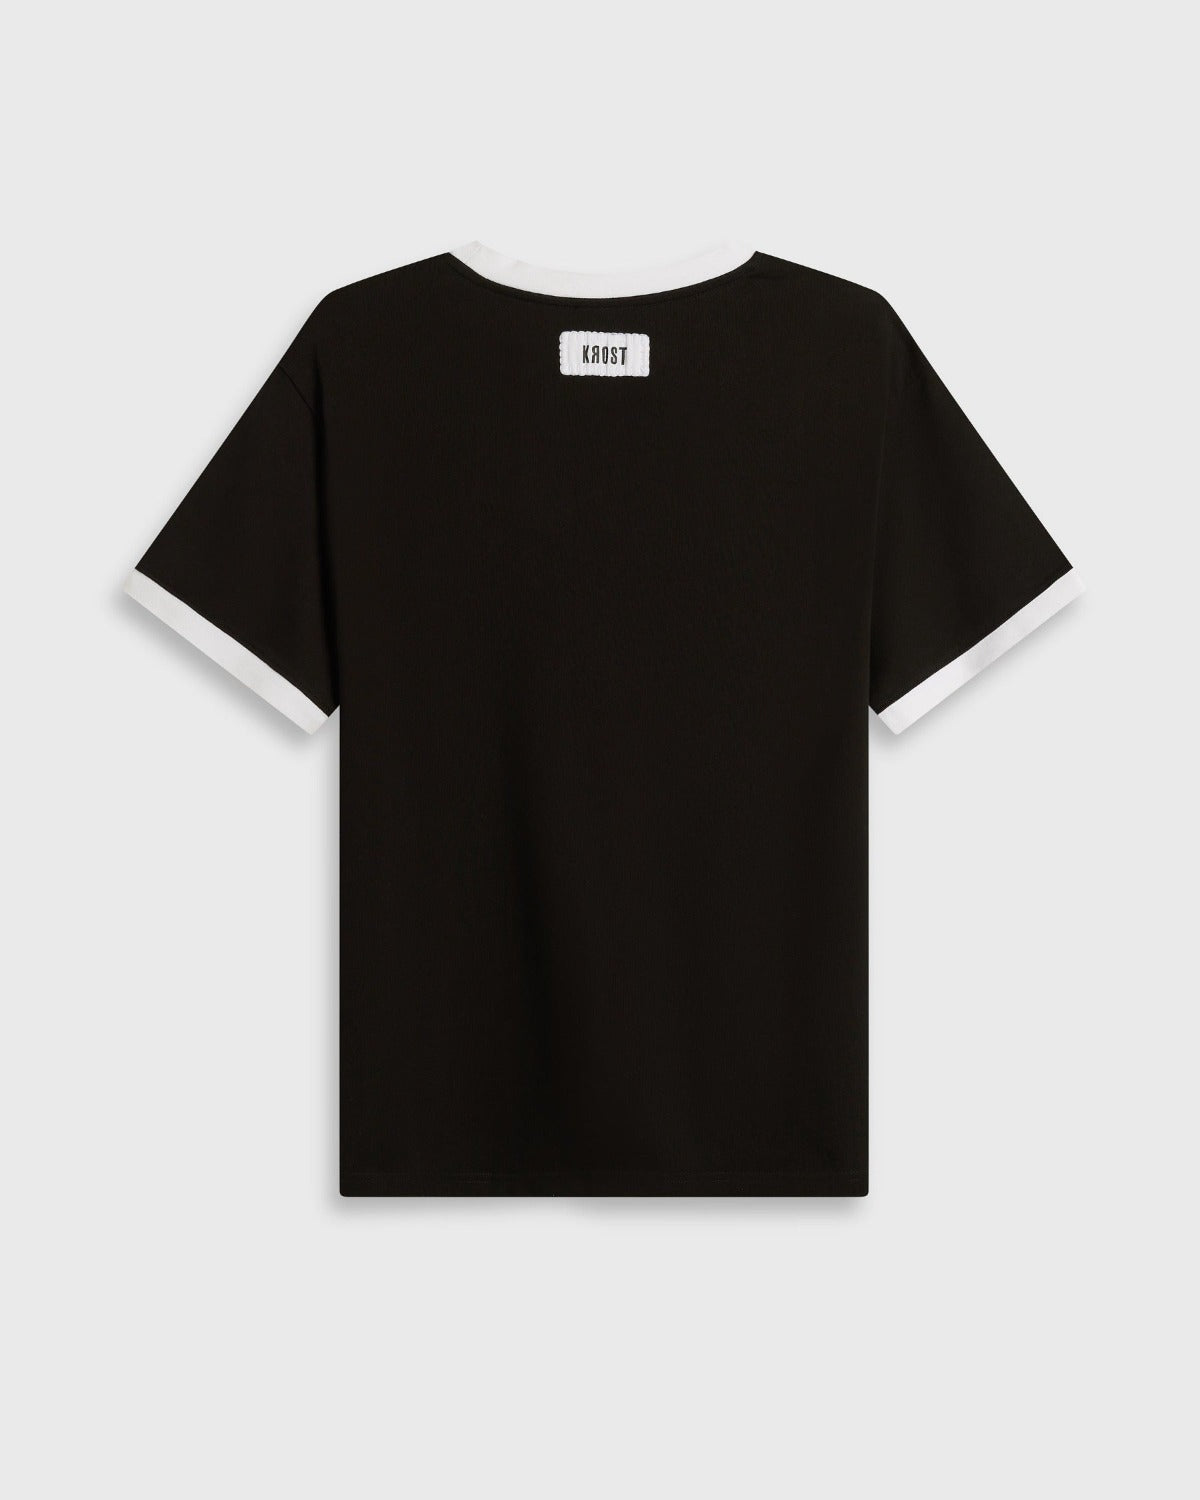 KROST x Monopoly | Community Well-Being Short Sleeve Tee